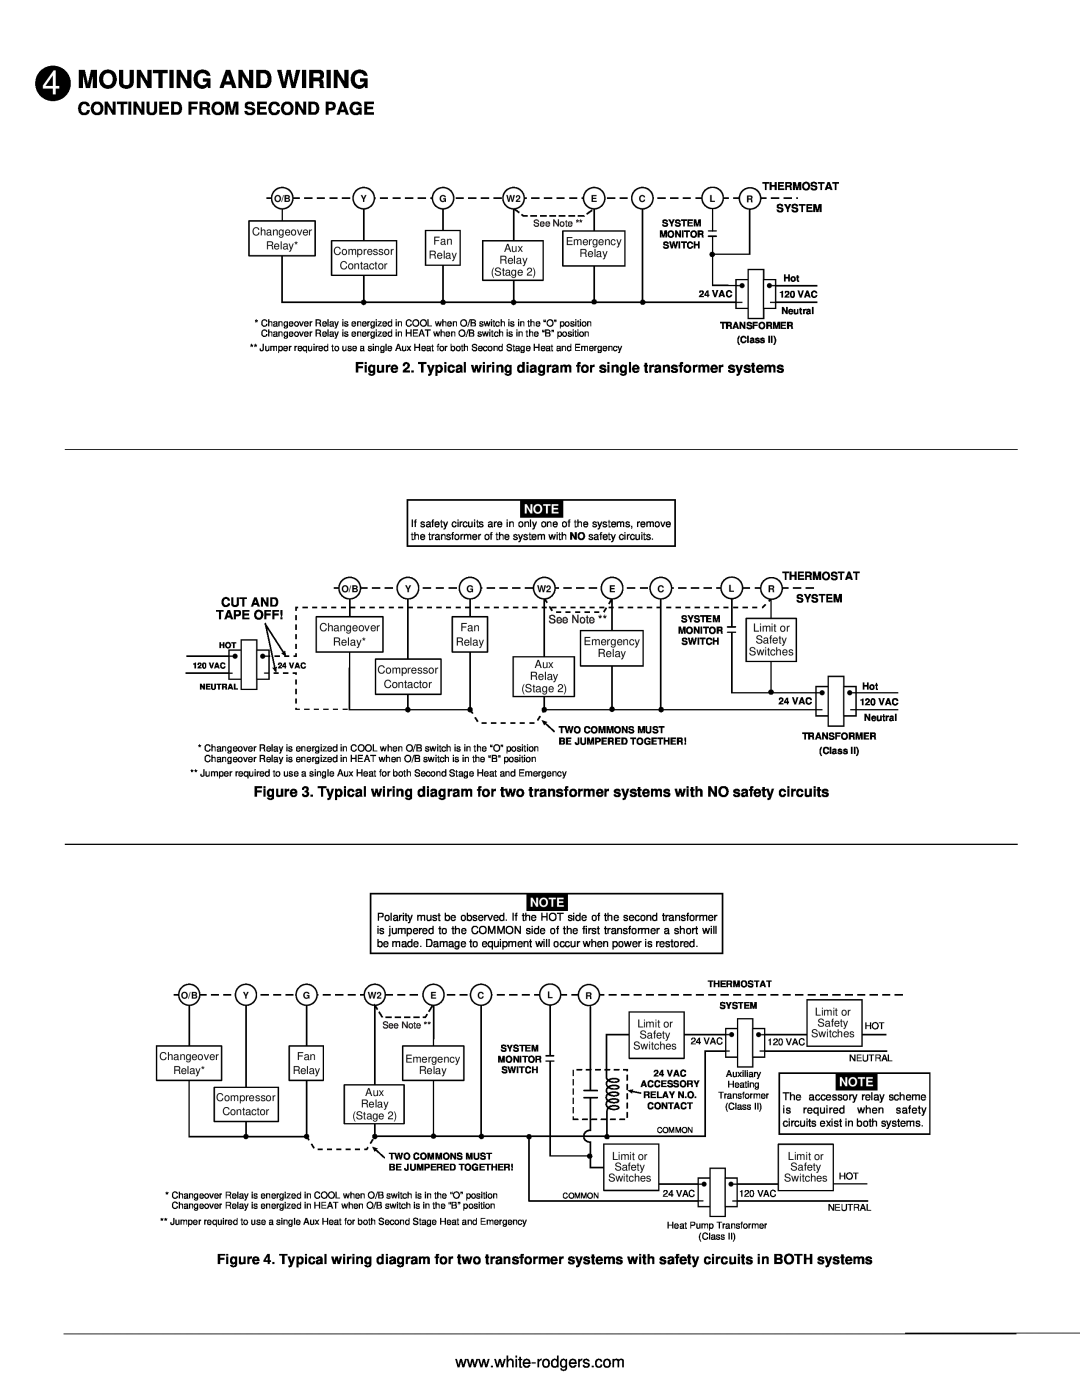 White Rodgers 500 installation instructions Continued From Second Page, Mounting And Wiring, Cut And 